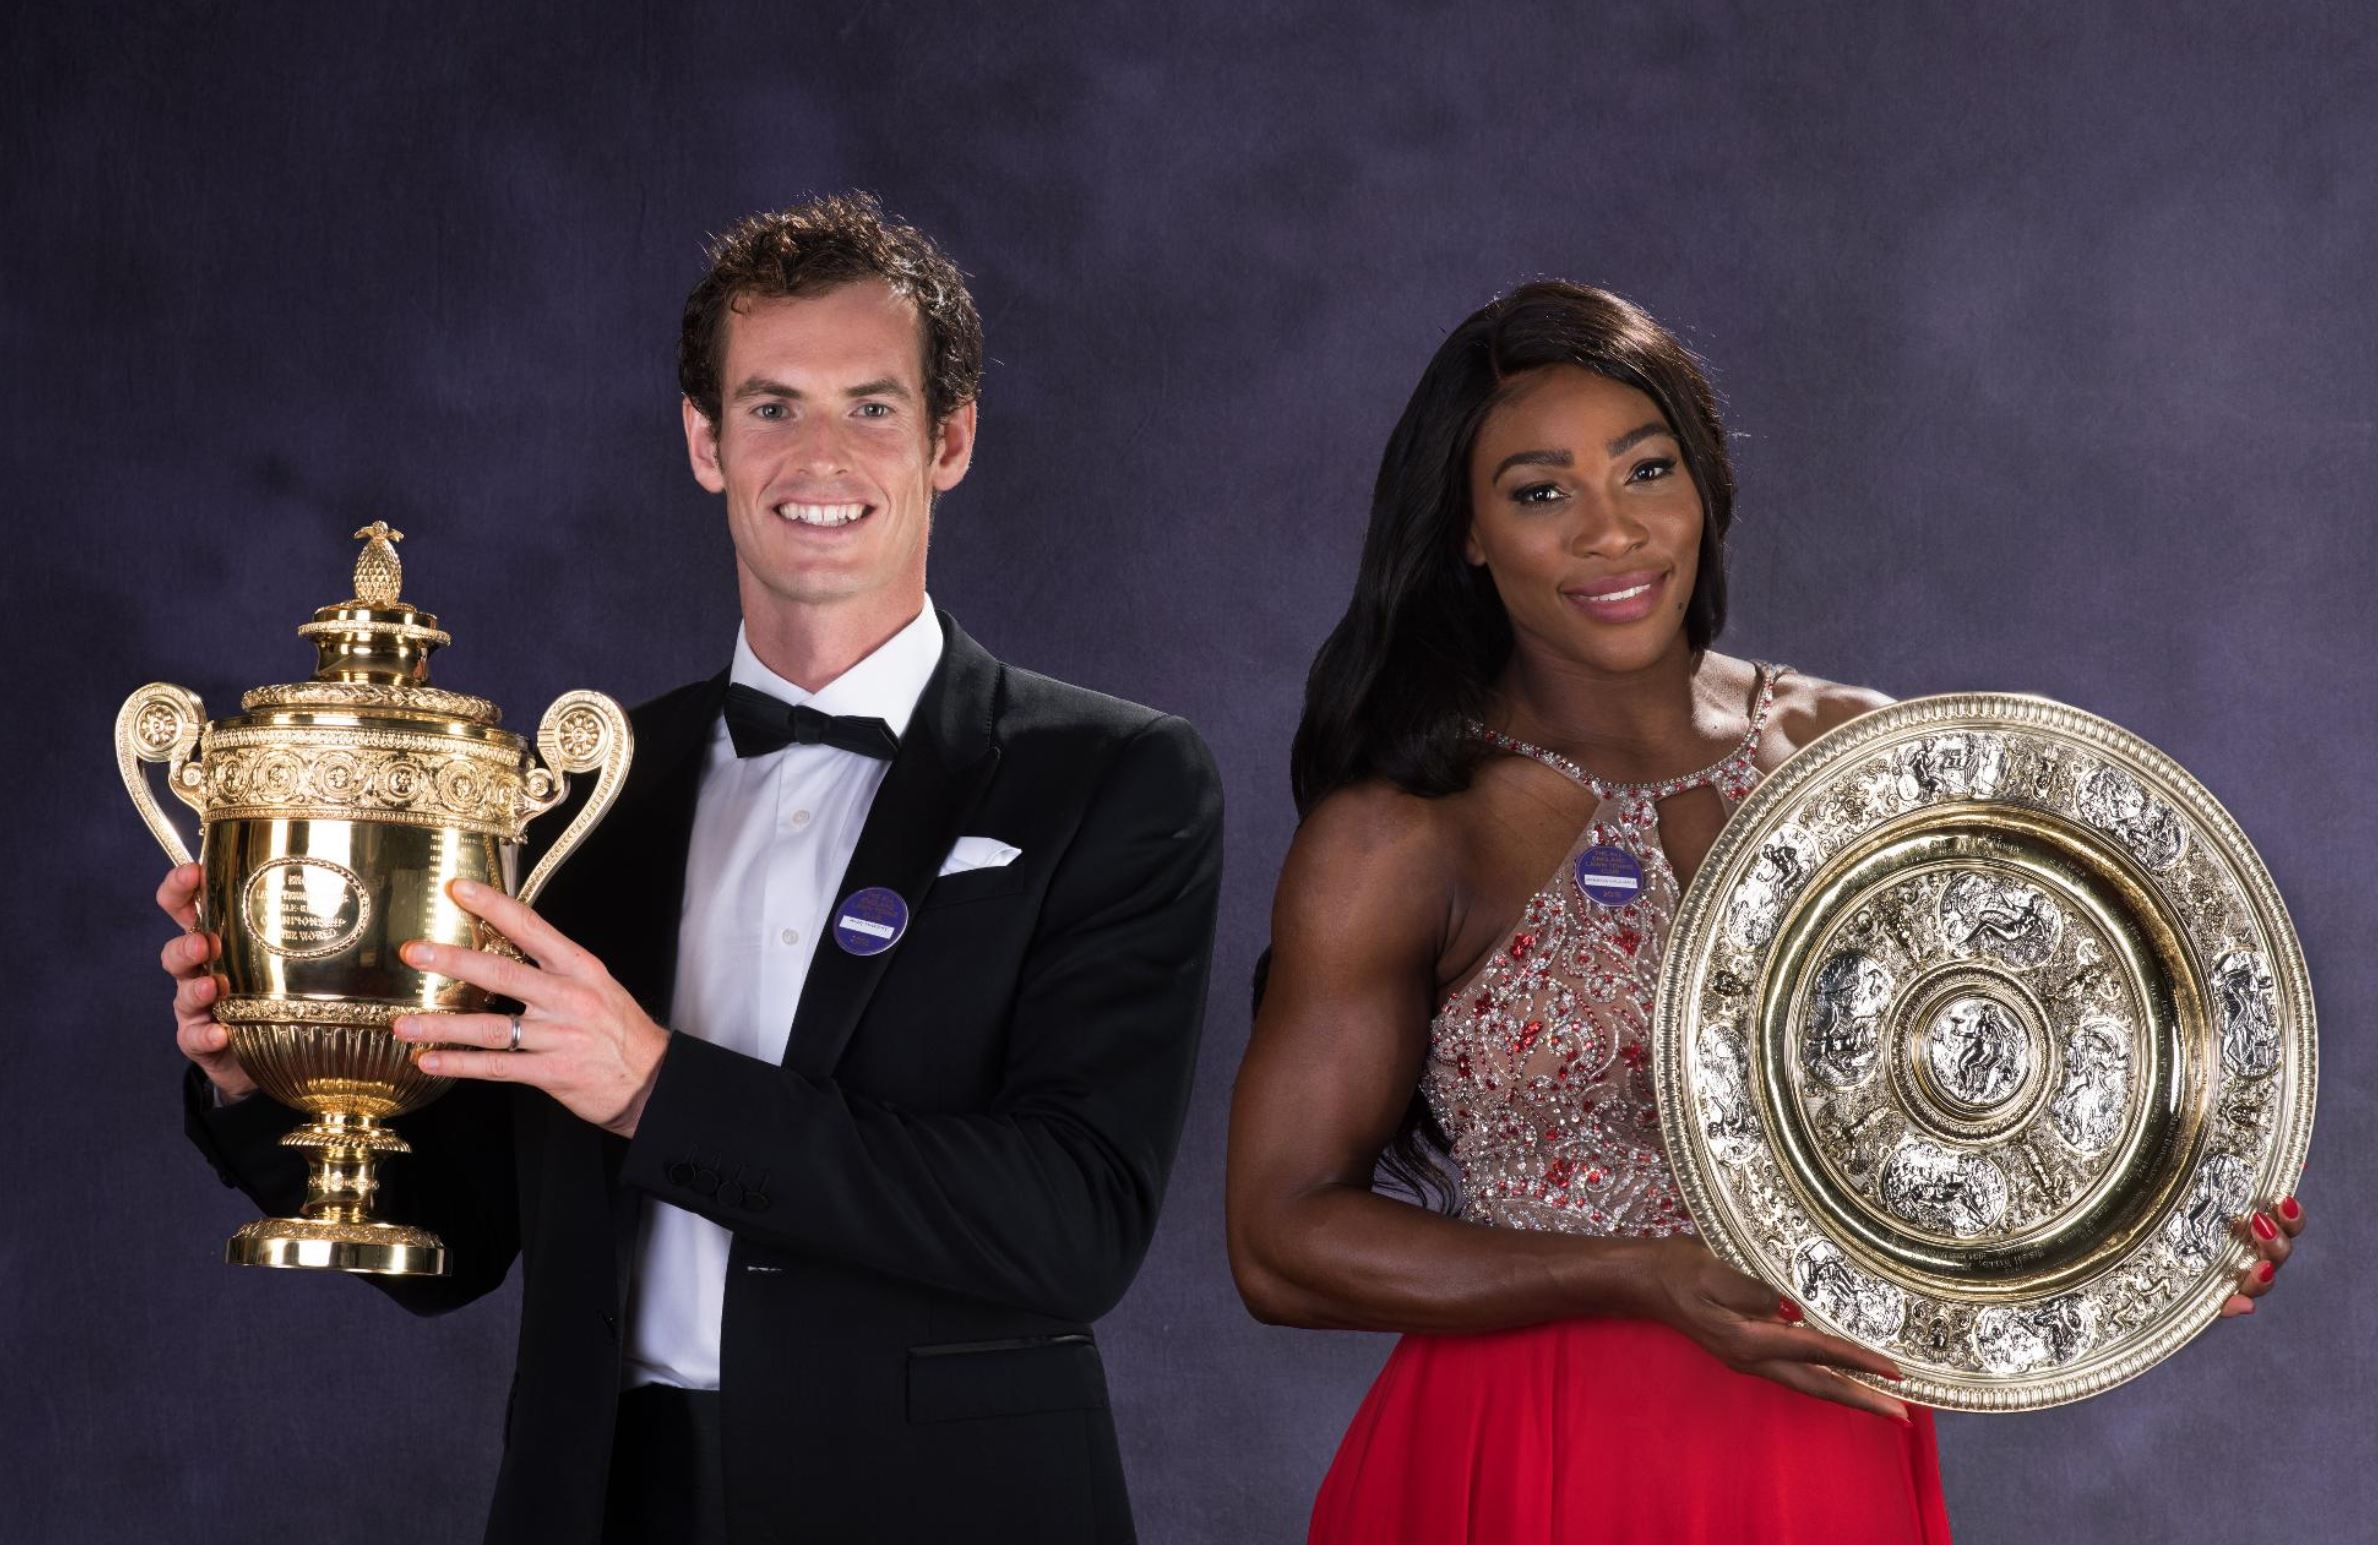 Andy Murray and Serena Williams Will Play Mixed Doubles at Wimbledon  